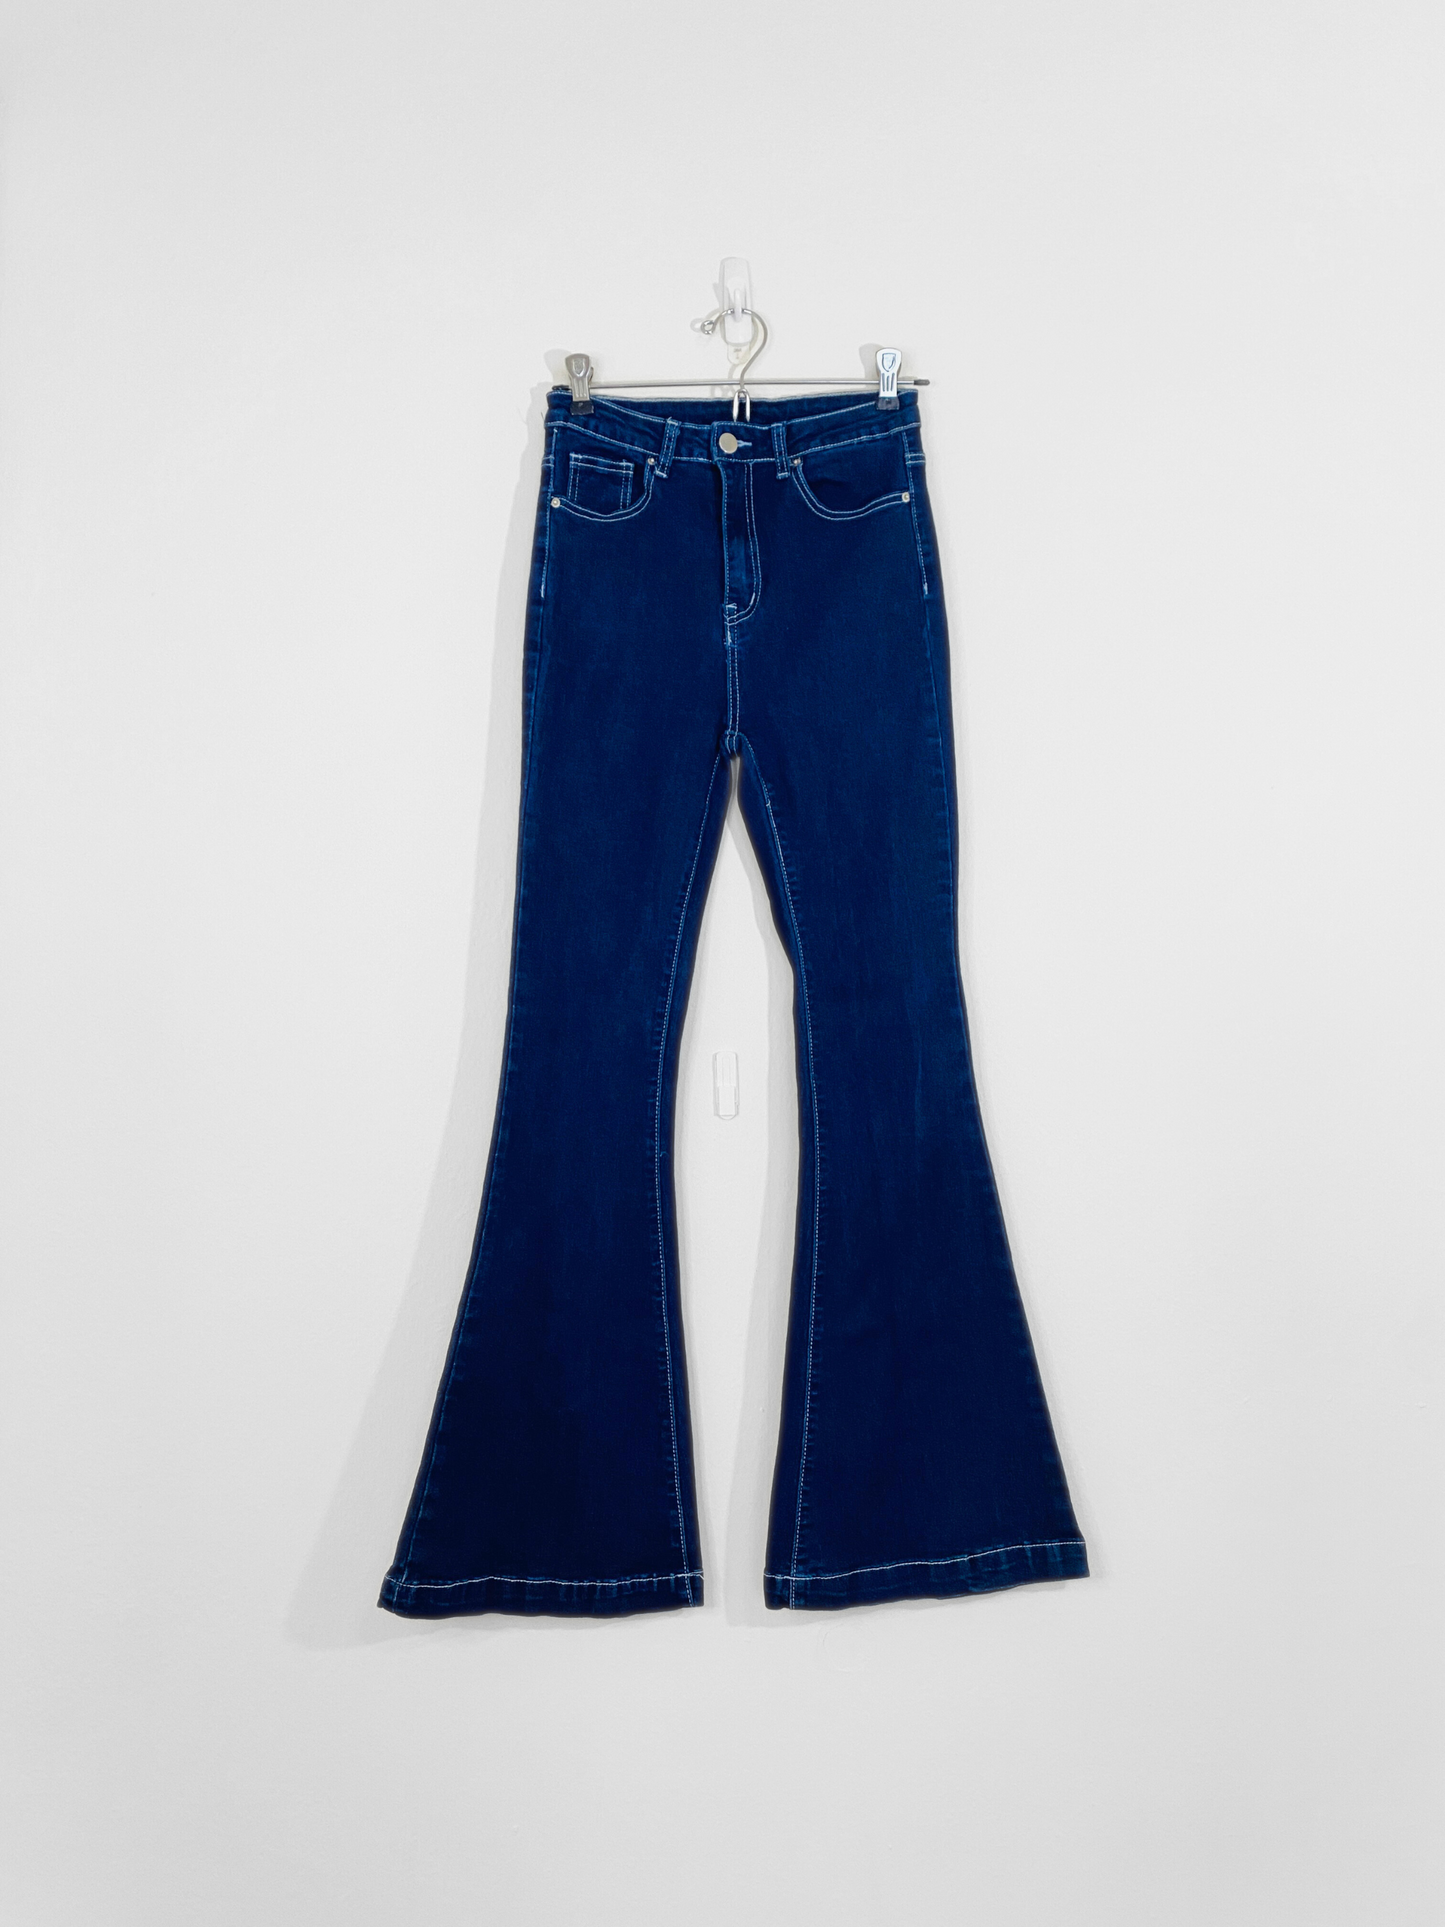 Bell Bottom Jeans (Small)